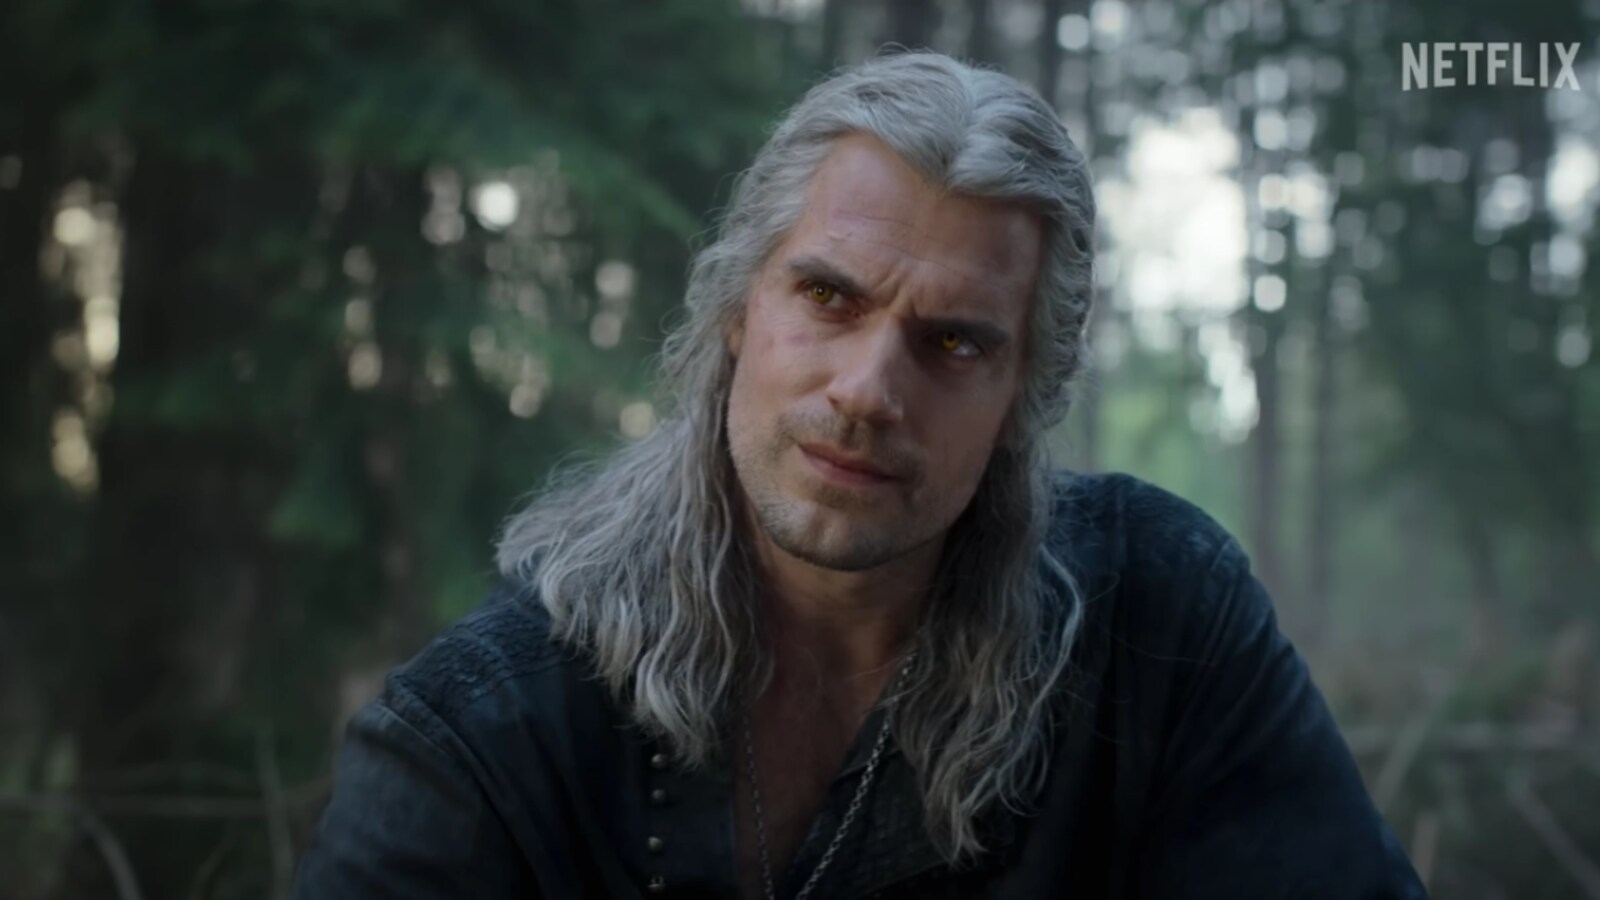 The Witcher Season 3 on Netflix finally has its first teaser